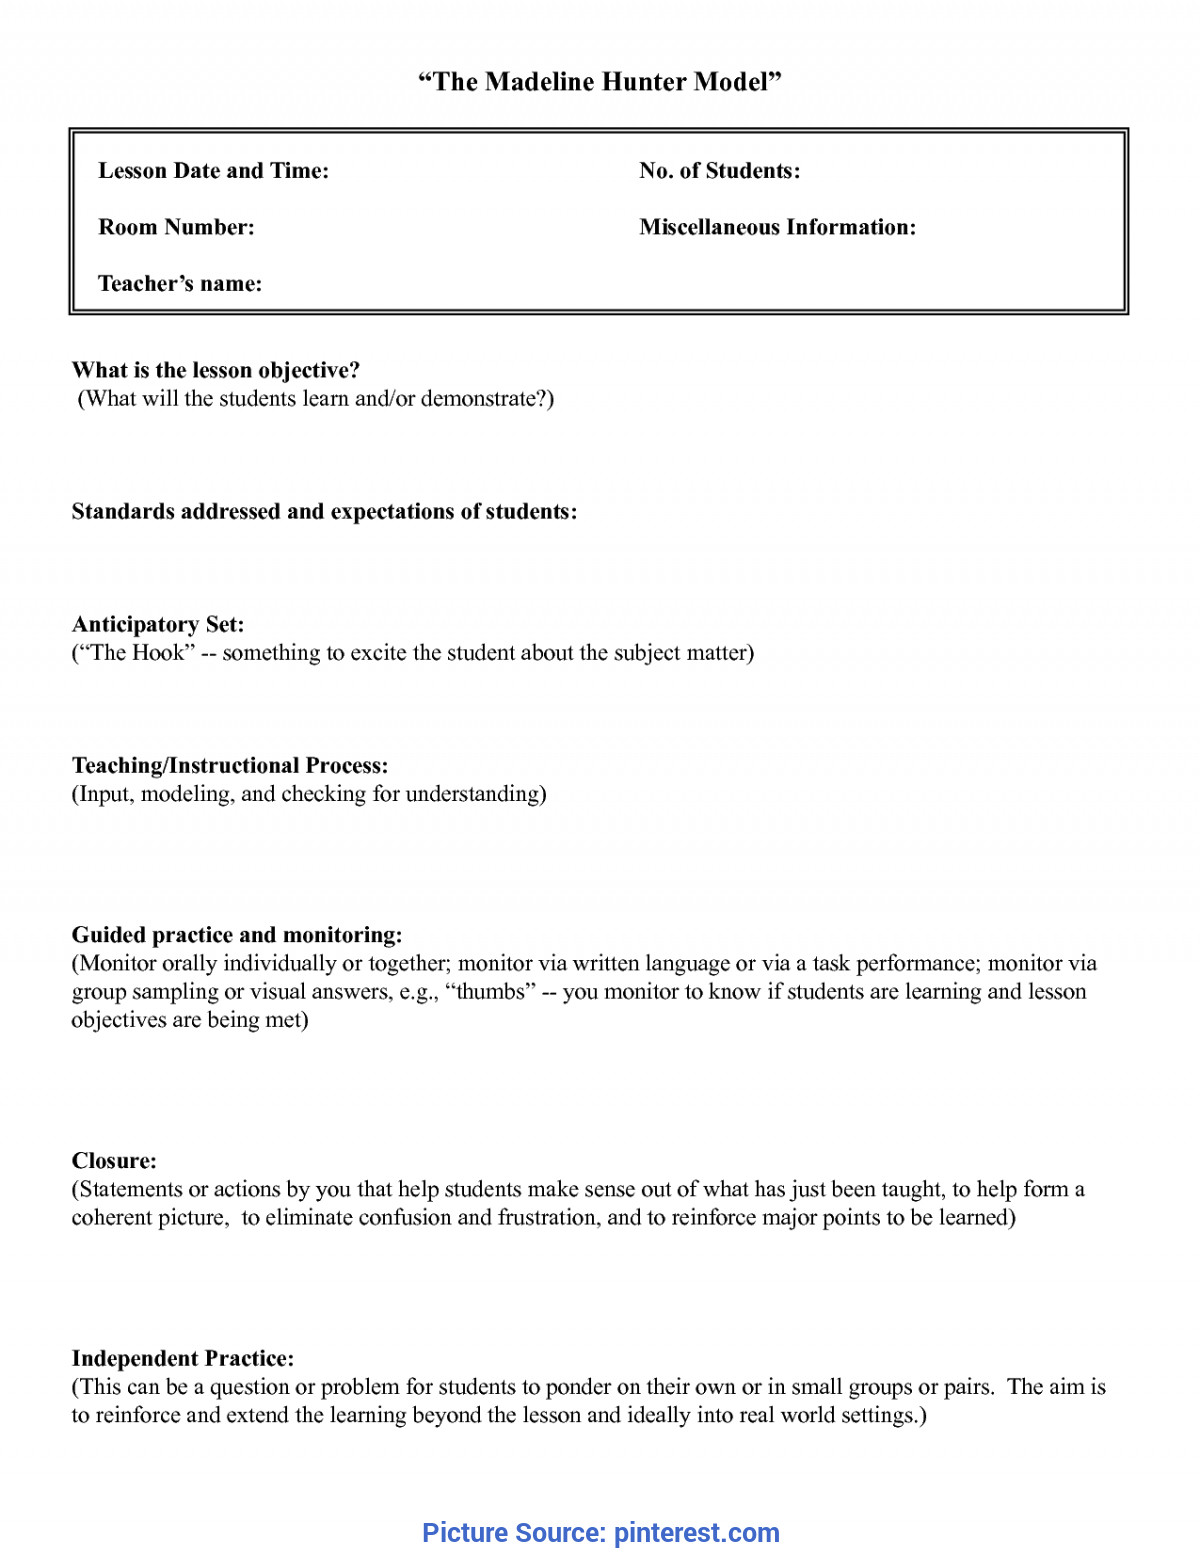 Madeline Hunter Lesson Plan Template Twiroo Com | Lesso Intended For Madeline Hunter Lesson Plan Template Blank